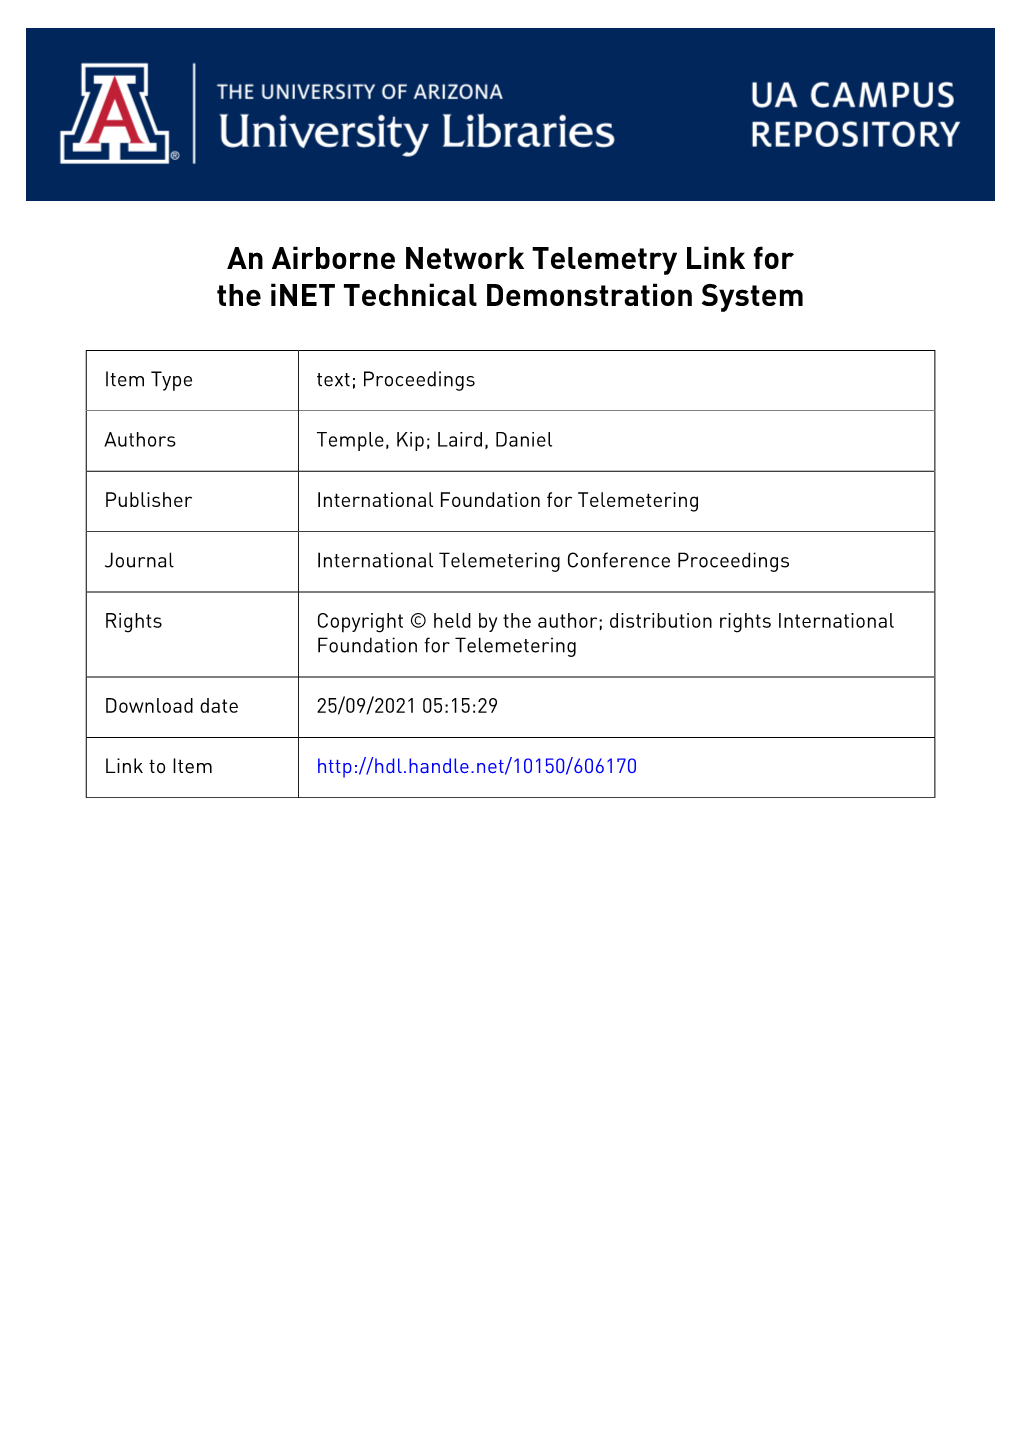 An Airborne Network Telemetry Link for the Inet Technical Demonstration System